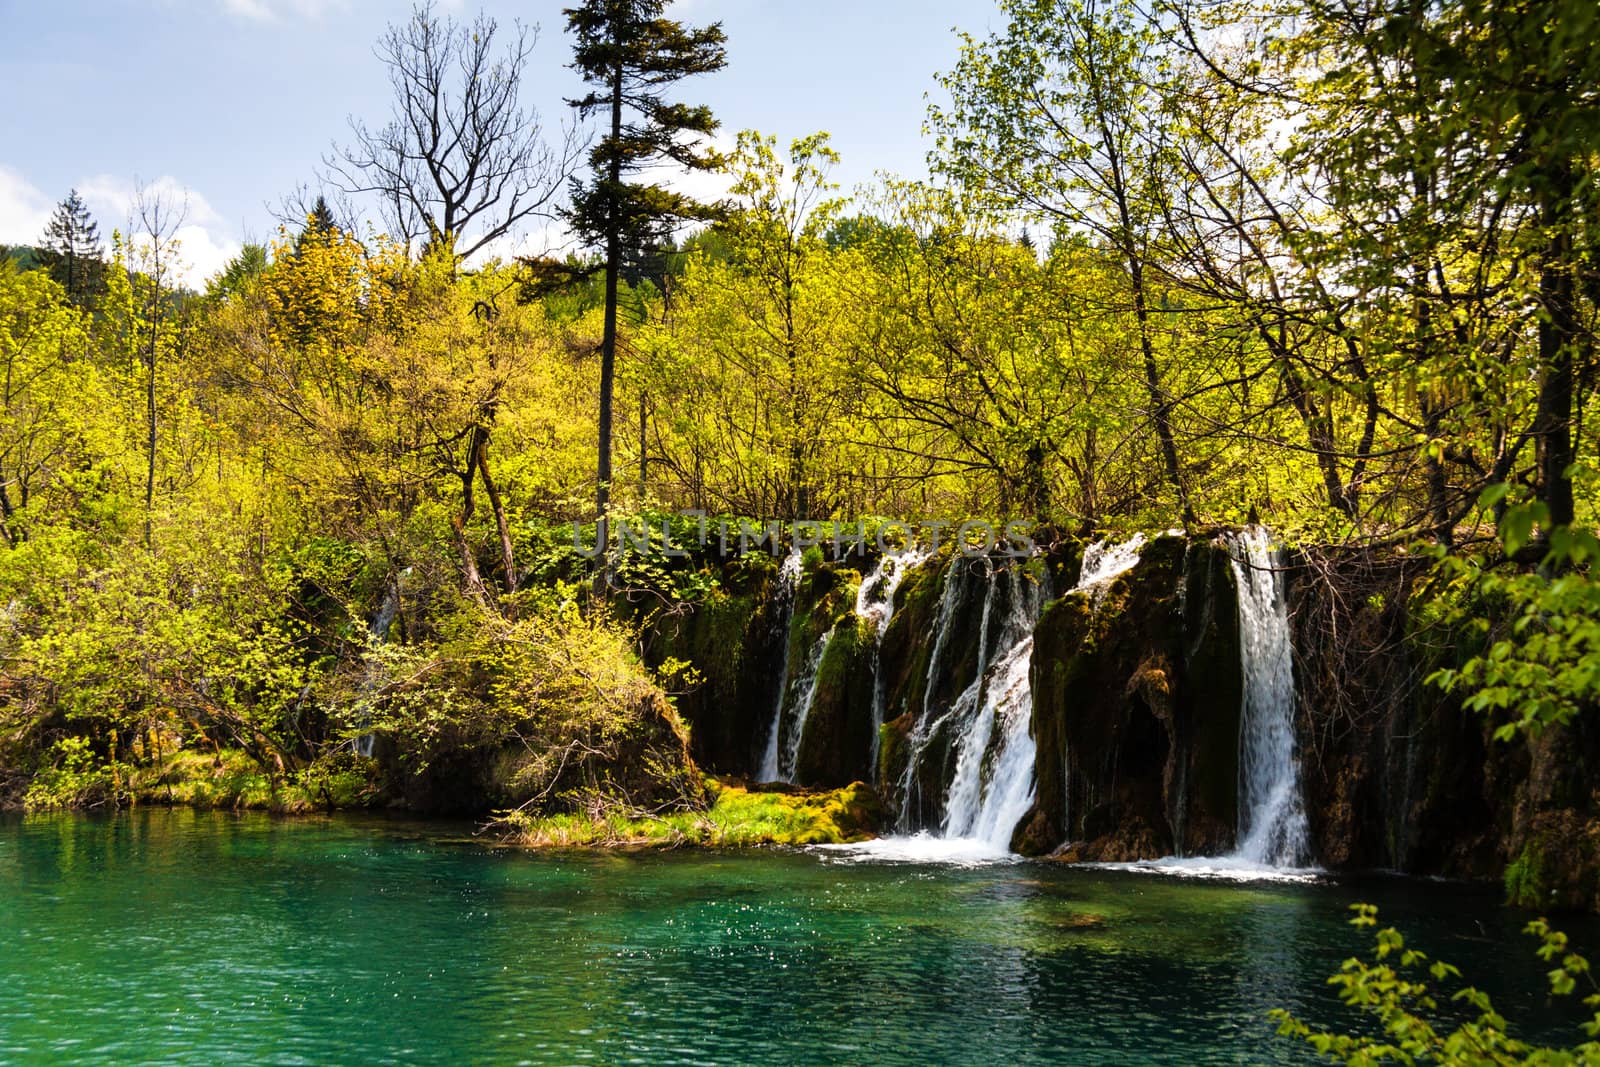 Forest waterfalls, shot at Plitvice lakes national park, Croatia.